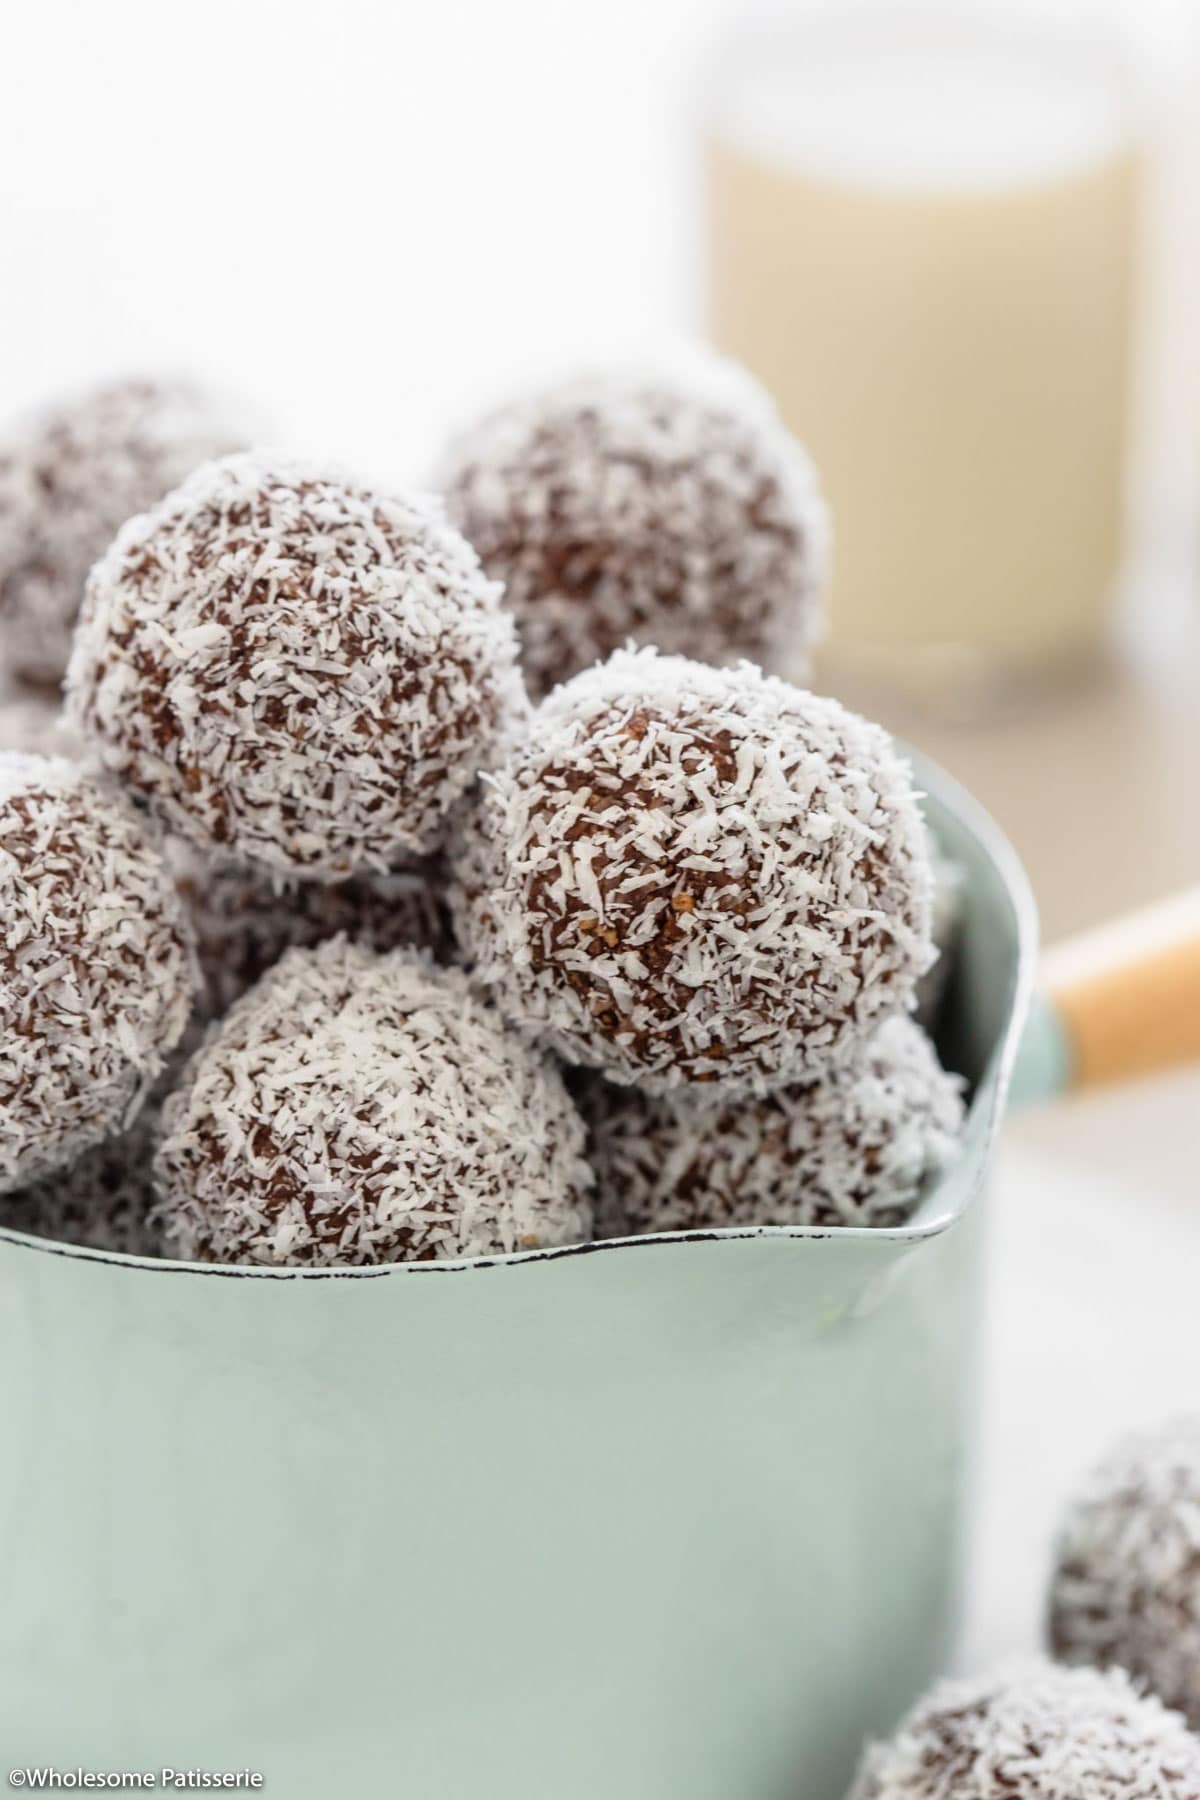 Super close up shot of the rum balls coated in coconut